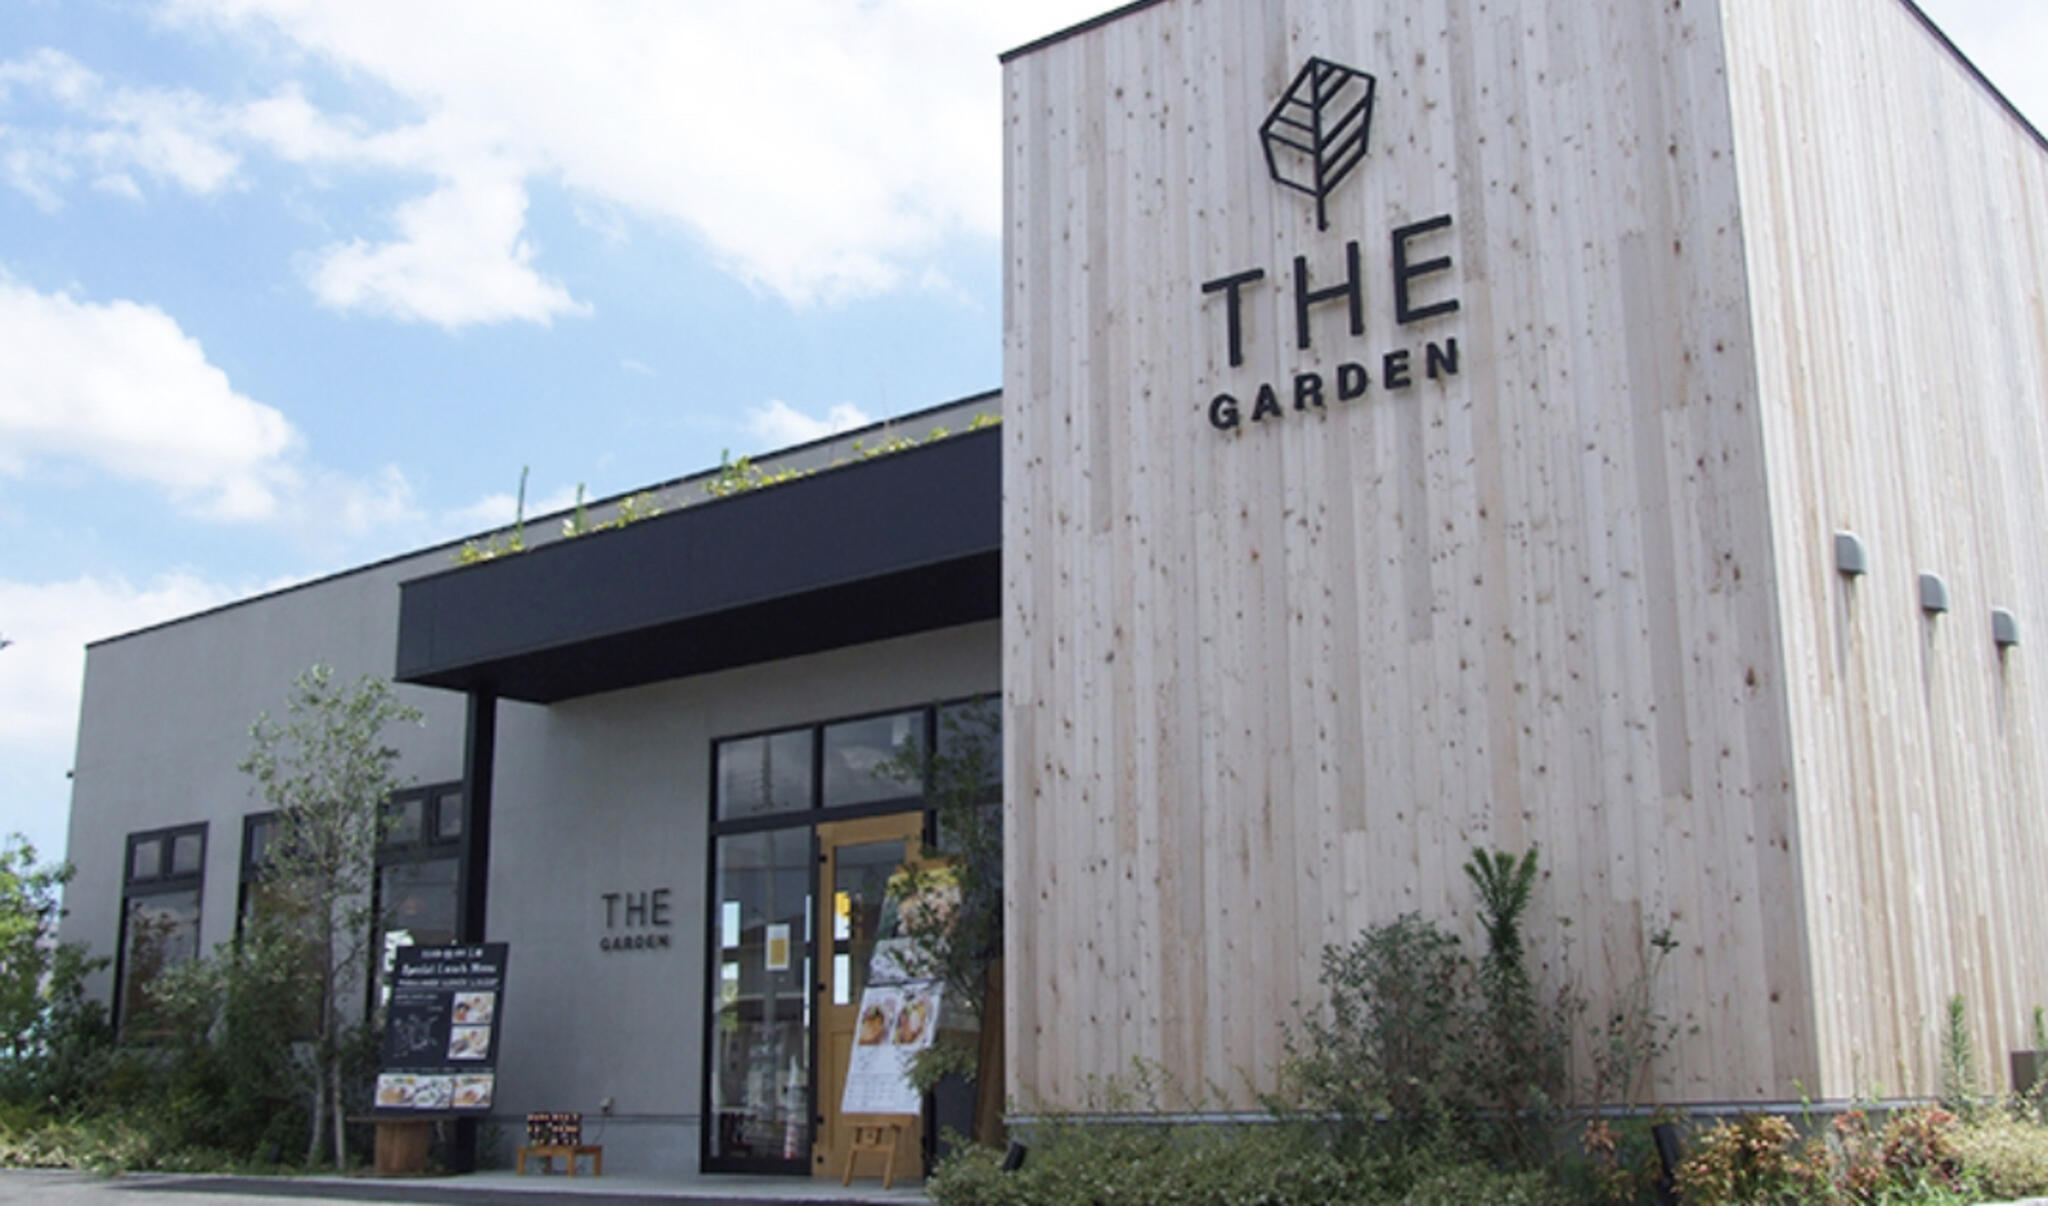 THE GARDEN cafe&sweetsの代表写真8